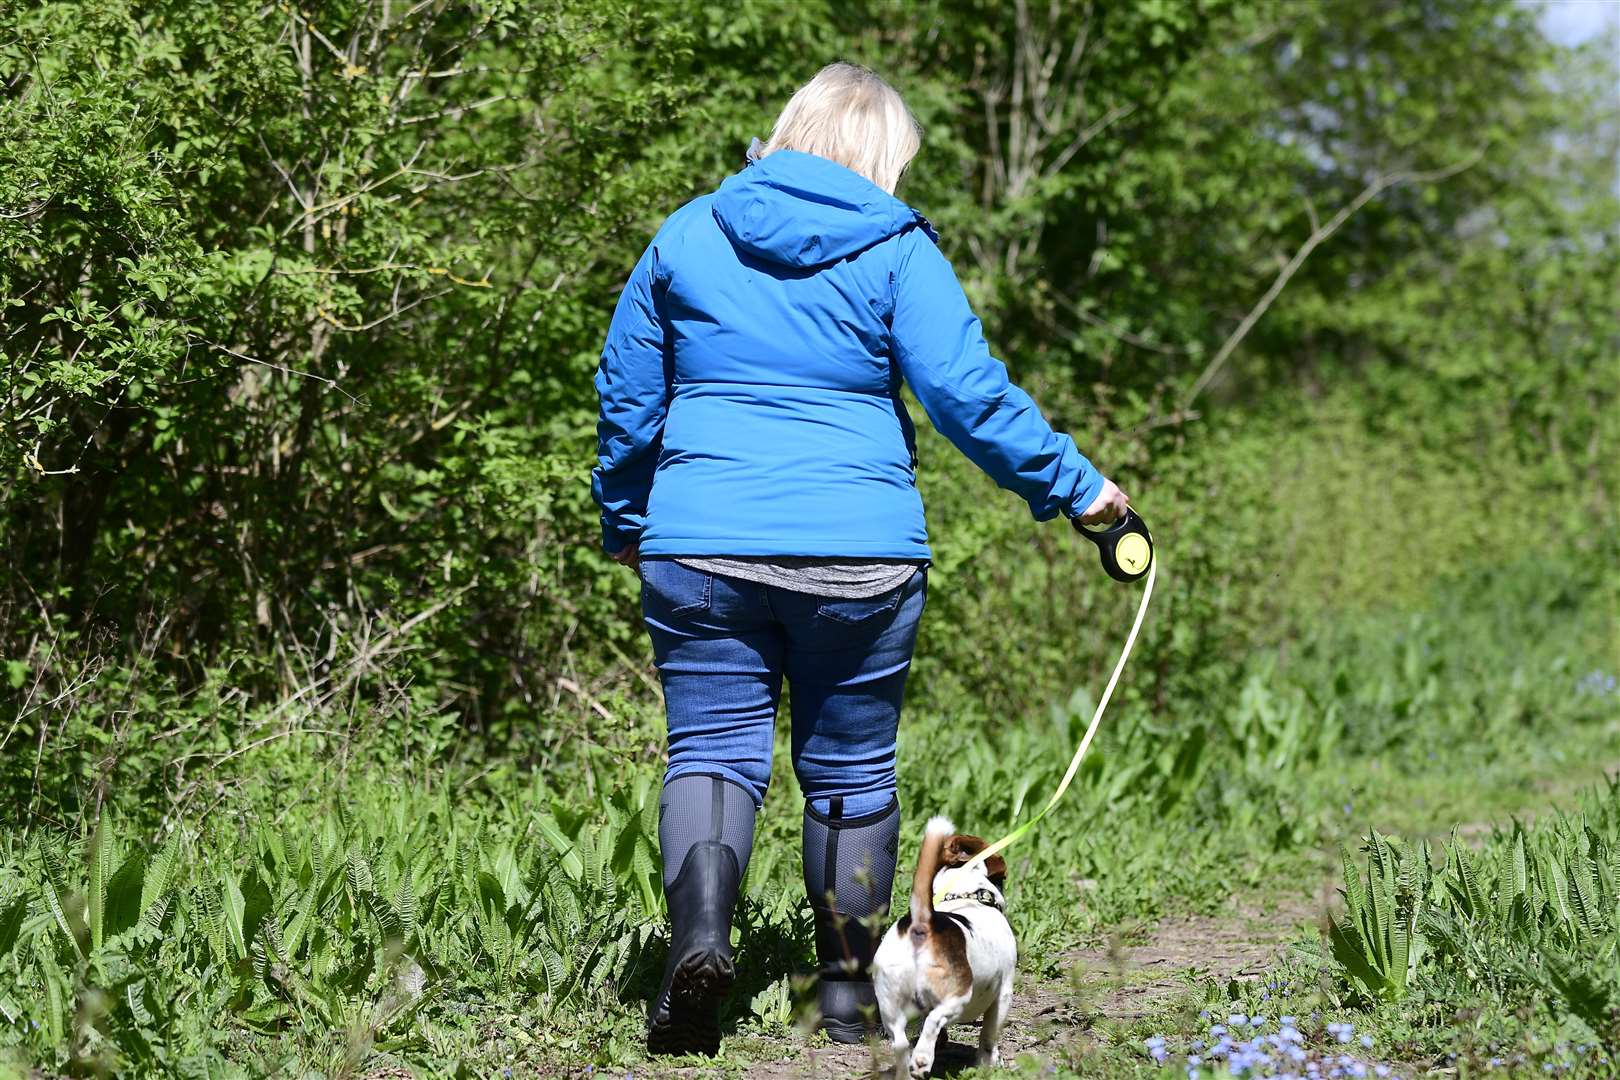 The actor leading Toby on the walk. Picture: Barry Goodwin